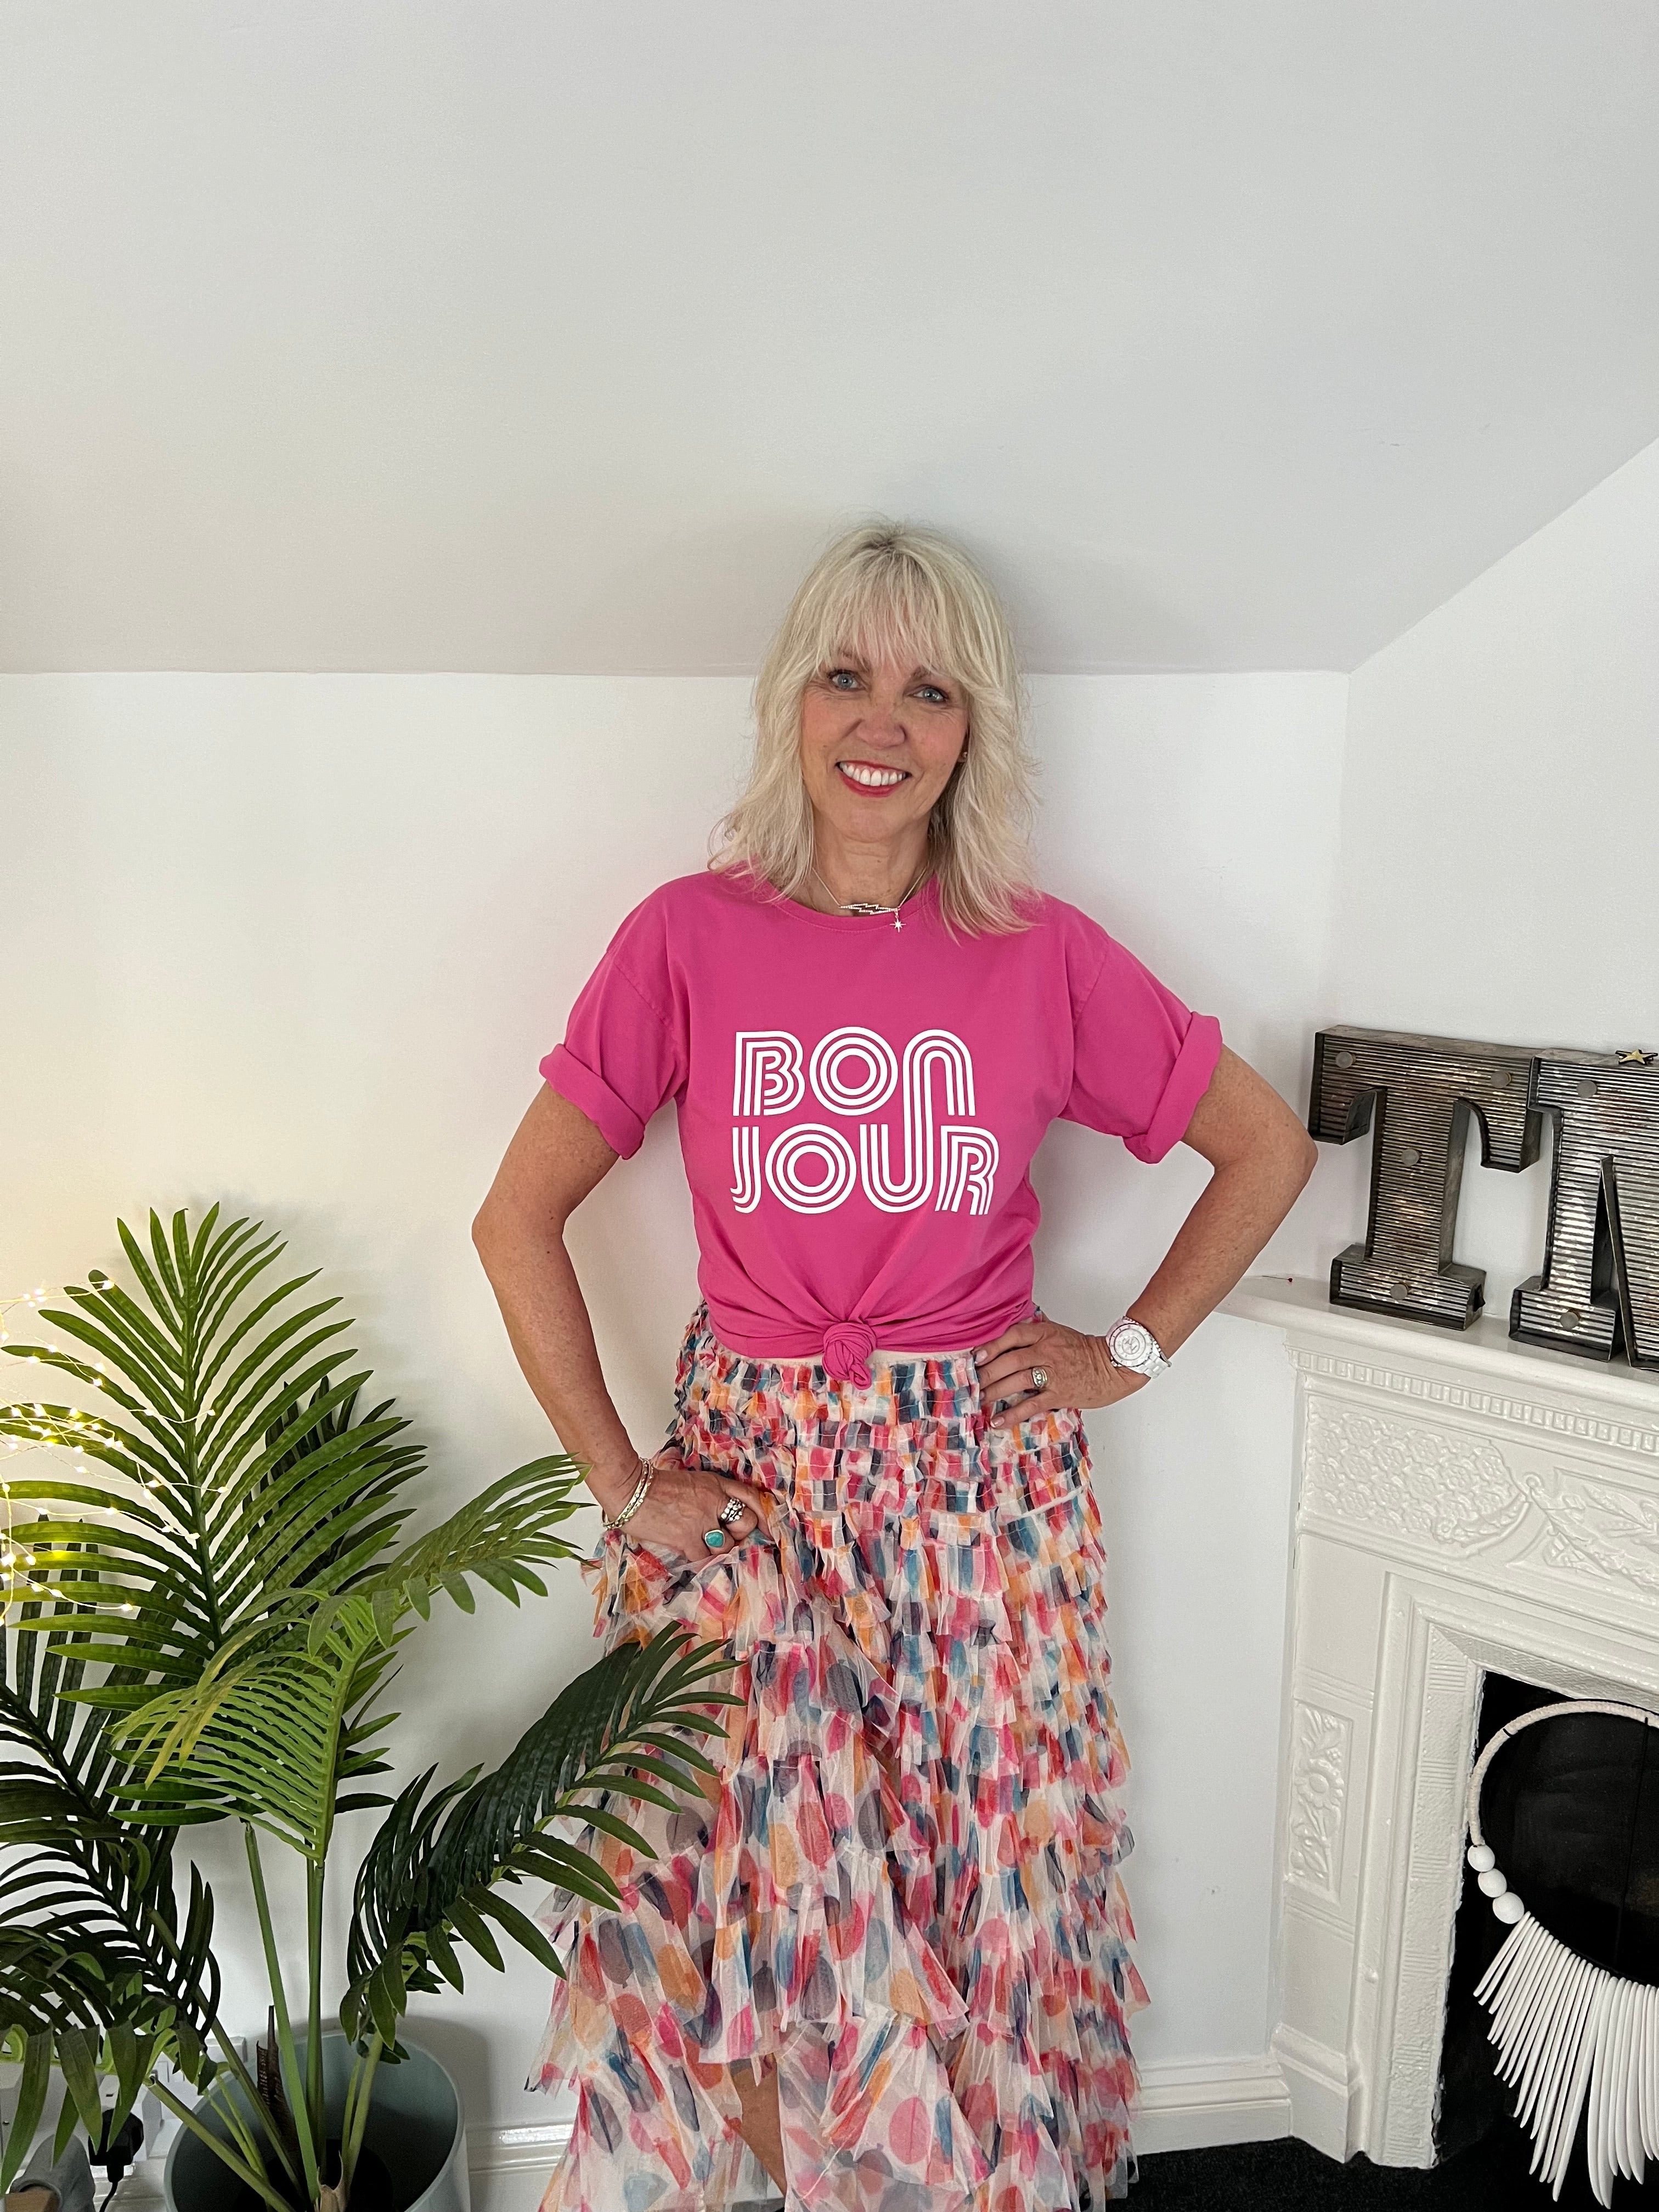 Bonjour Tee in Pink